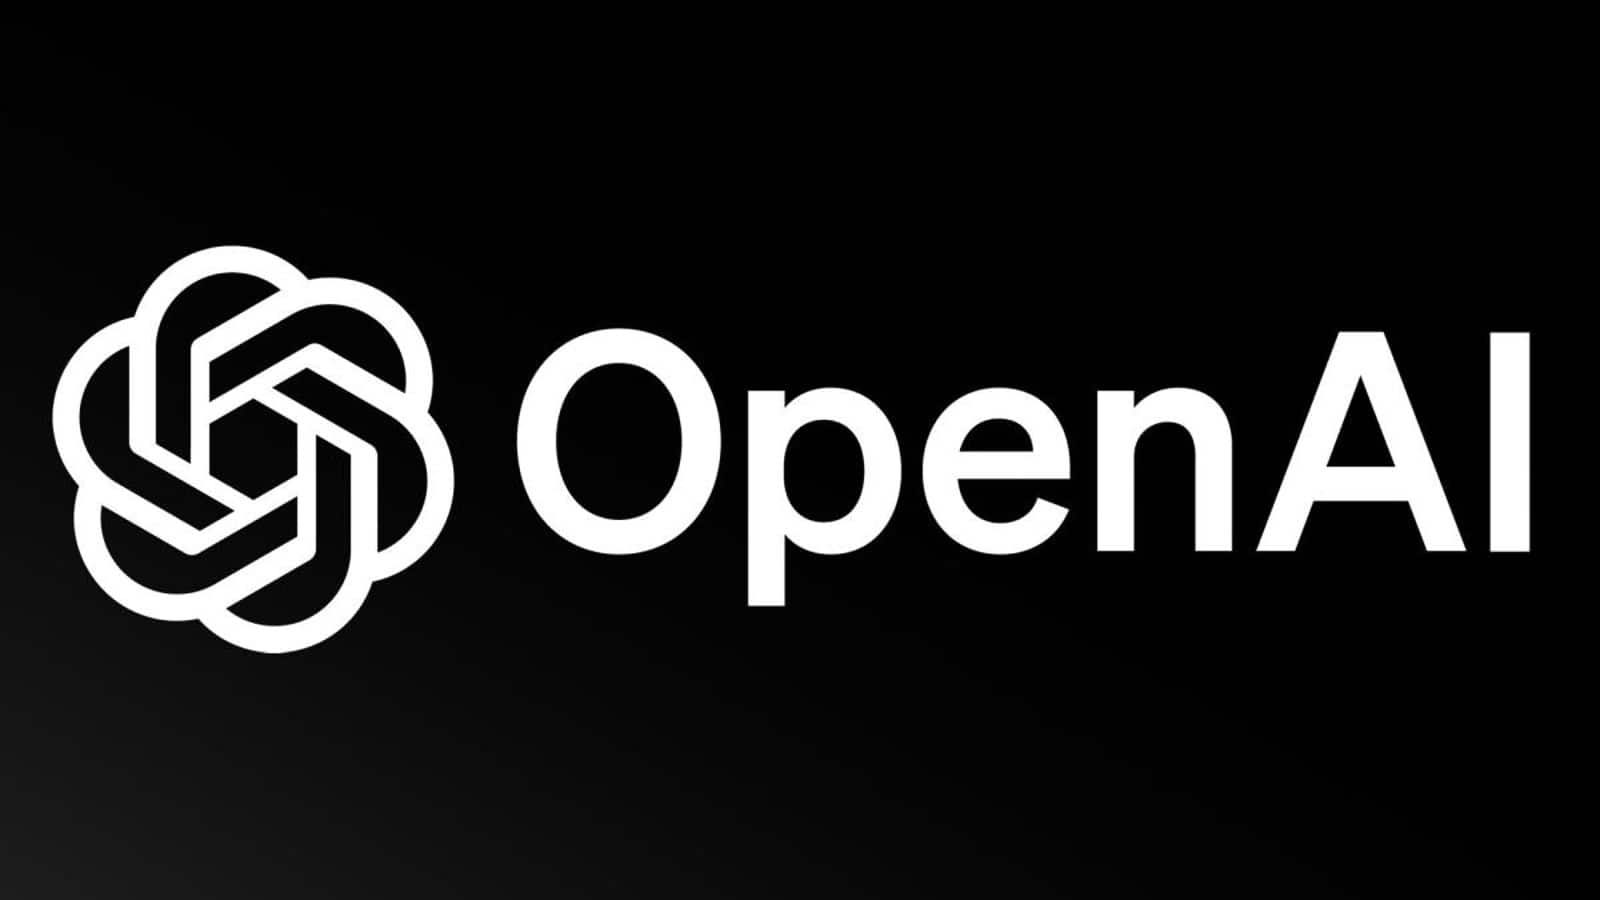 OpenAI signs licensing deal with American magazine giant Dotdash Meredith